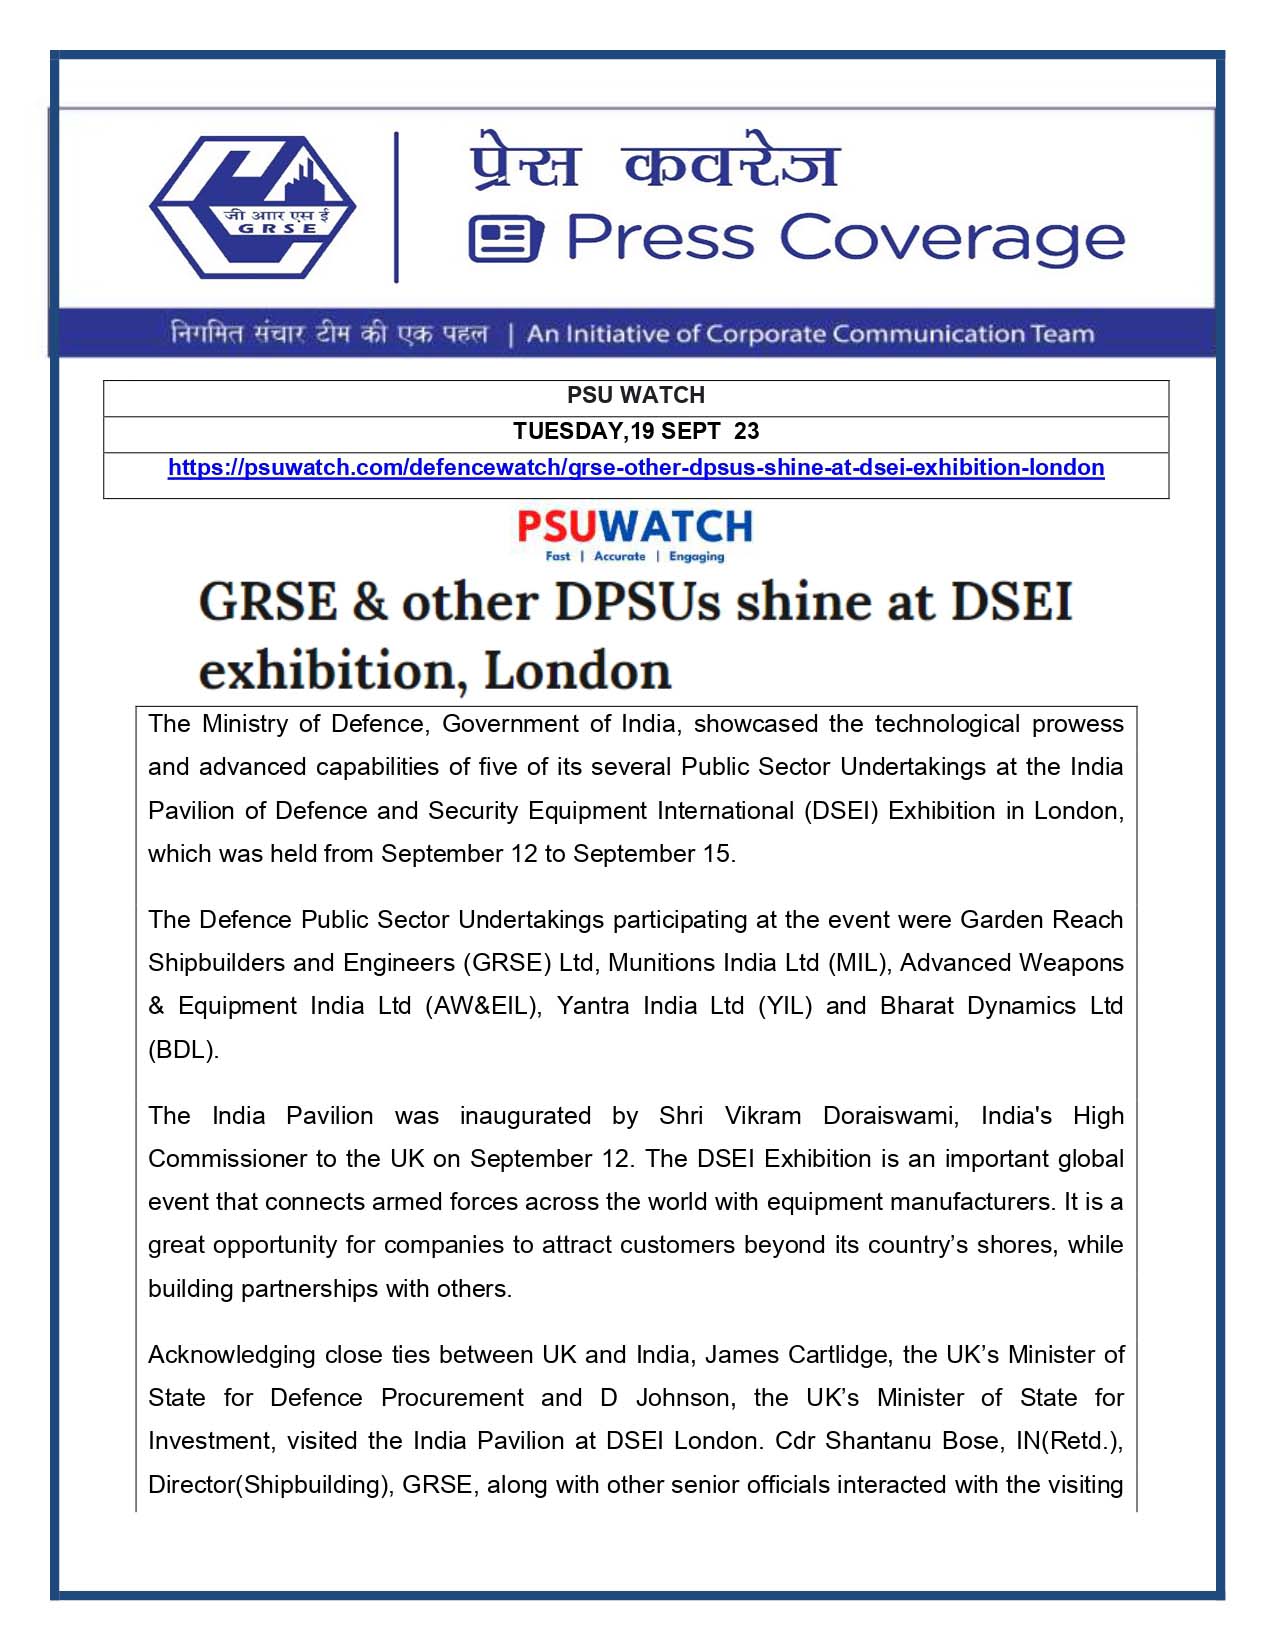 Press Coverage : PSU Watch, 19 Sep 23 : GRSE and other DPSUs shines at DSEI exhibition, London